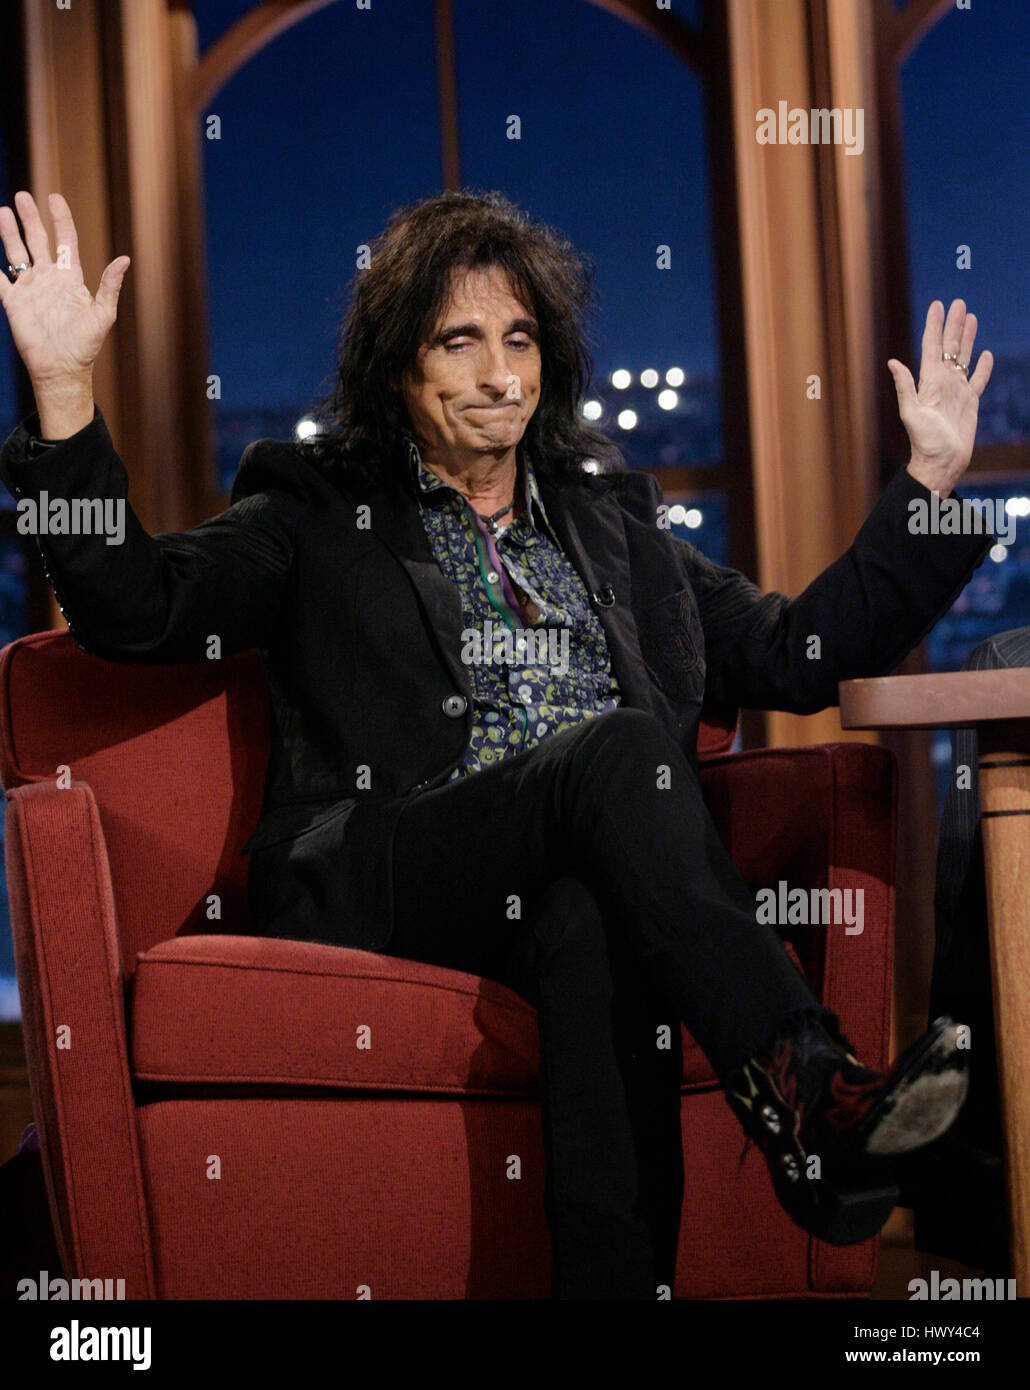 Musician Alice Copper during a segment of 'The Late Late Show with Craig Ferguson' at CBS Television City on Sept.10, 2008 in Los Angeles, California. Photo by Francis Specker Stock Photo